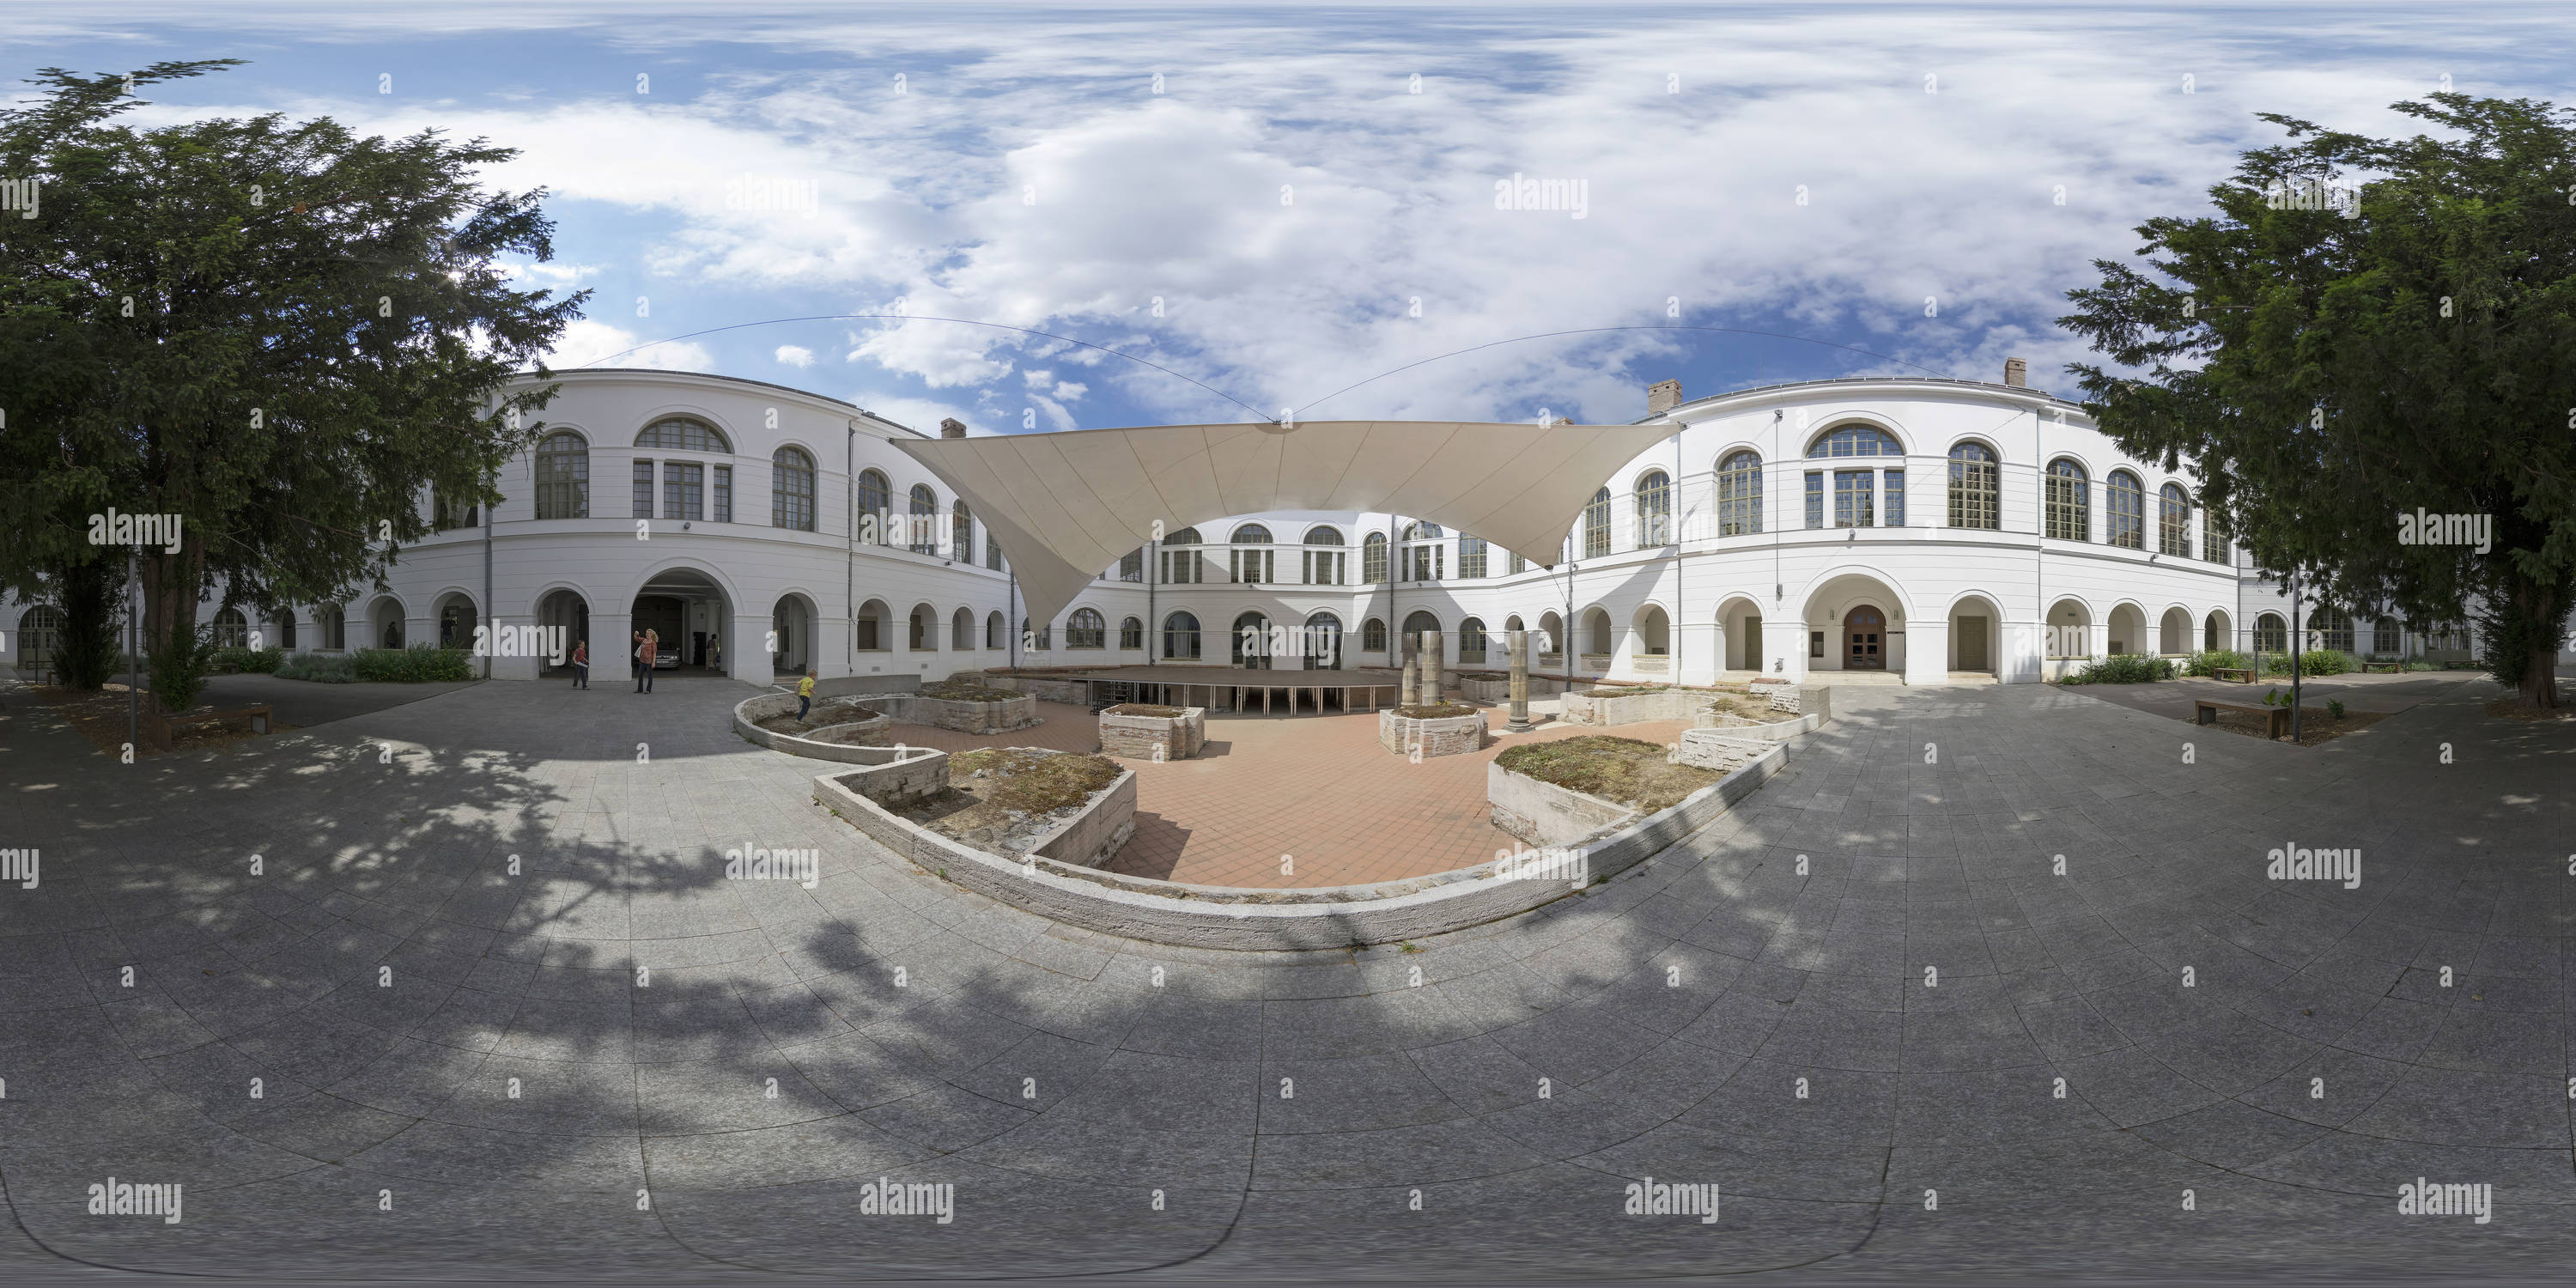 360 degree panoramic view of The County Hall